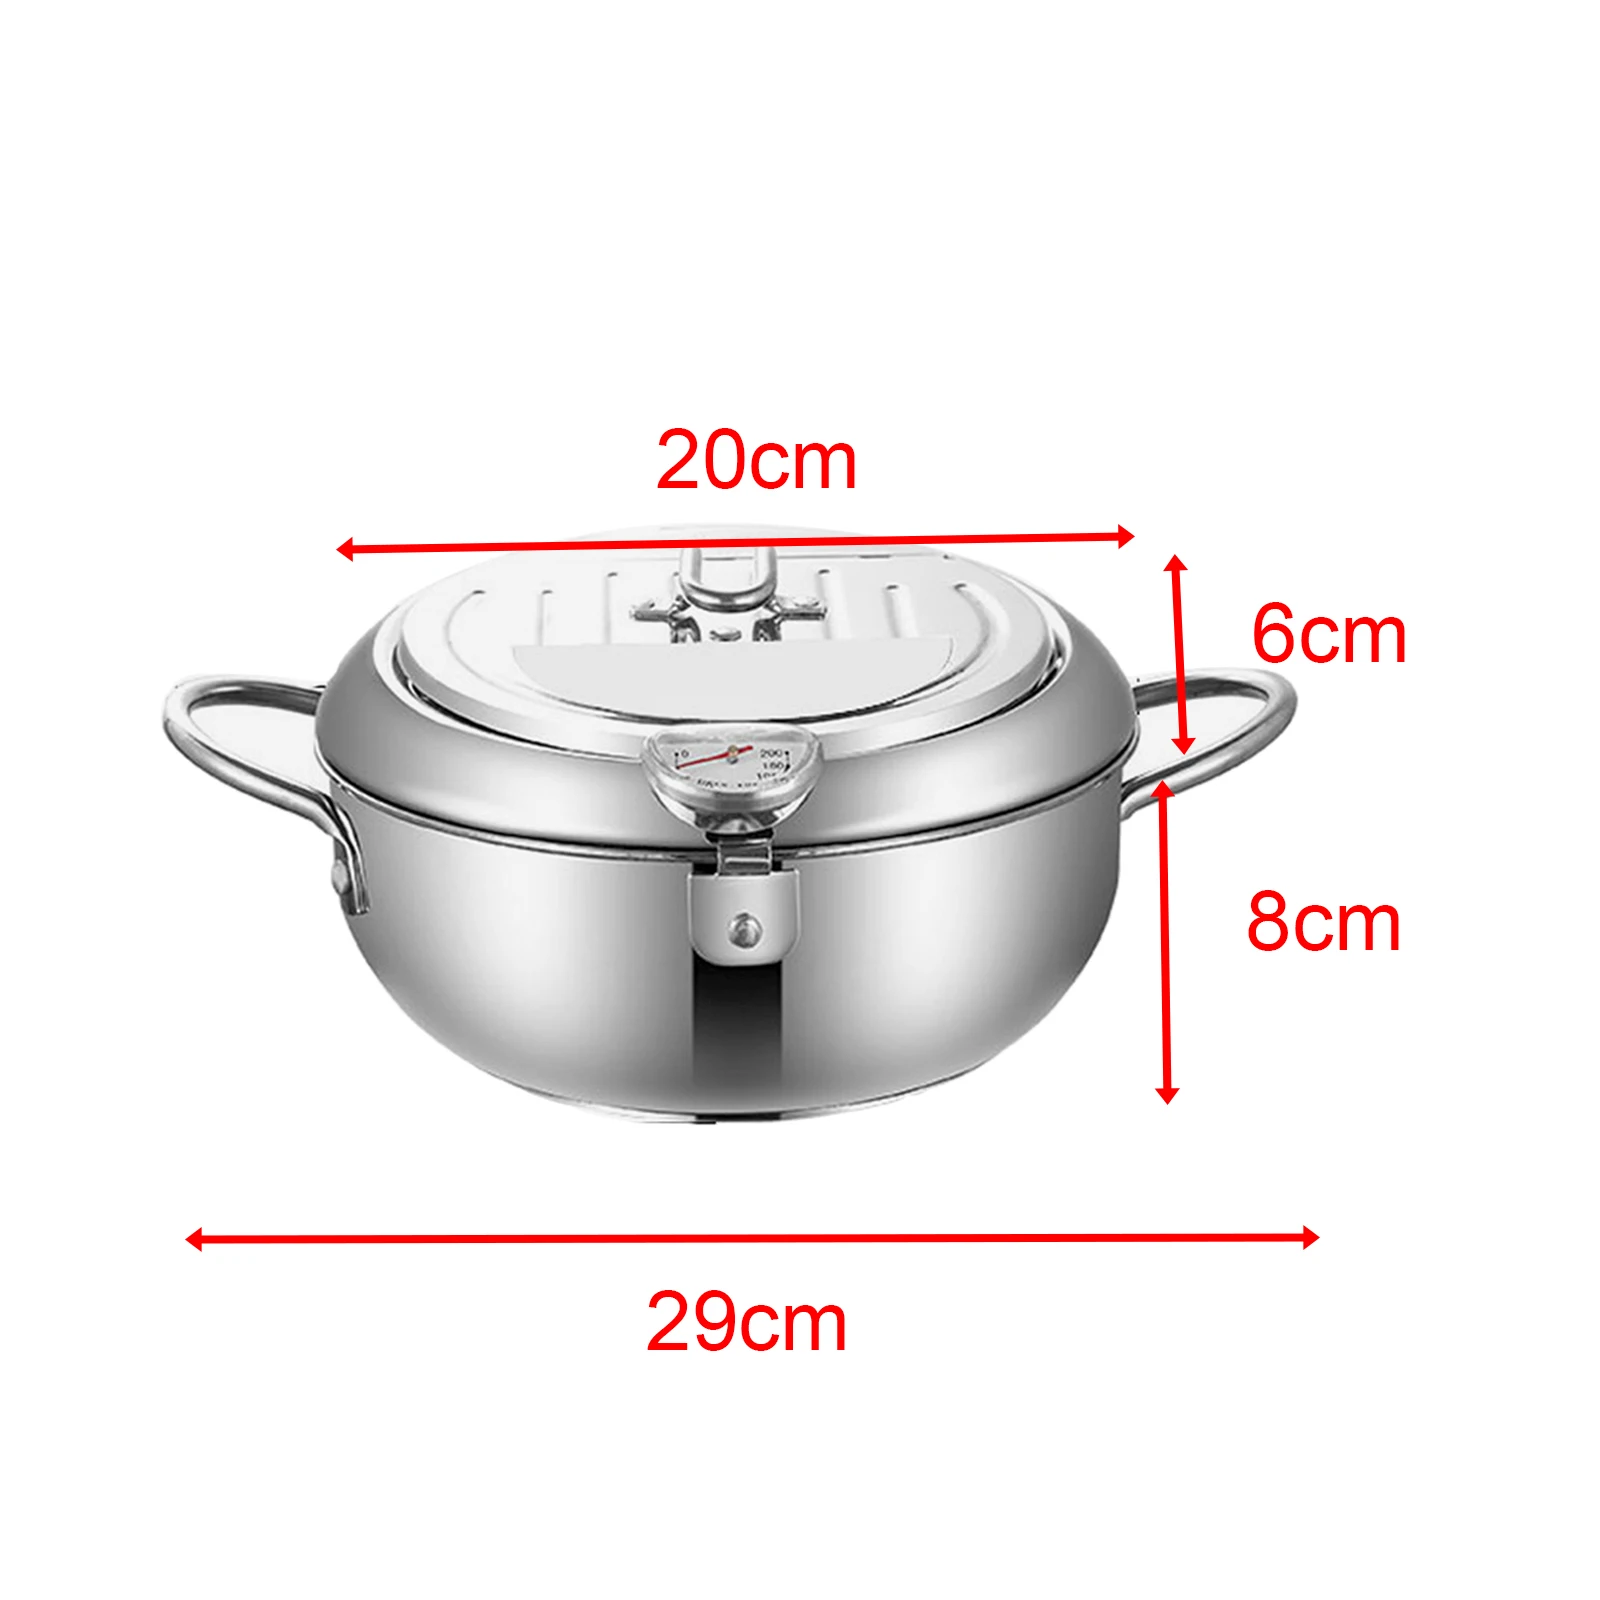 https://ae01.alicdn.com/kf/Sf2cd7b44021841e18dc5c00b228ba09dT/Japanese-Deep-Frying-Pot-with-Thermometer-Cookware-Flat-Bottom-Stainless-Steel-Tempura-Fryer-for-Household-Dried.jpg